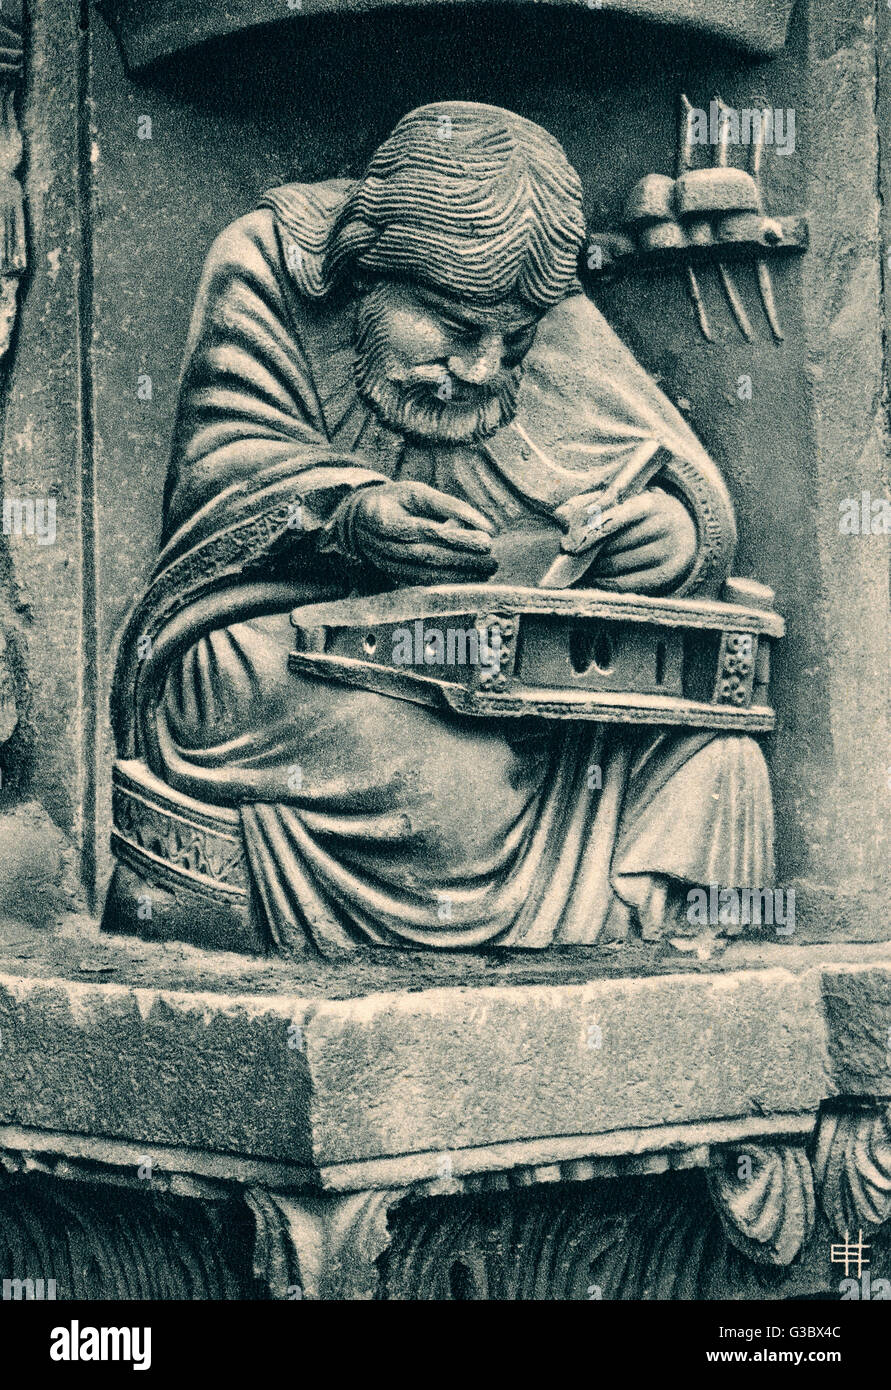 Sculpture of Pythagoras, Greek philosopher and mathematician, within the tympanum on the right bay of the Royal Portal, Chartres Cathedral, France.      Date: 12th-13th century Stock Photo